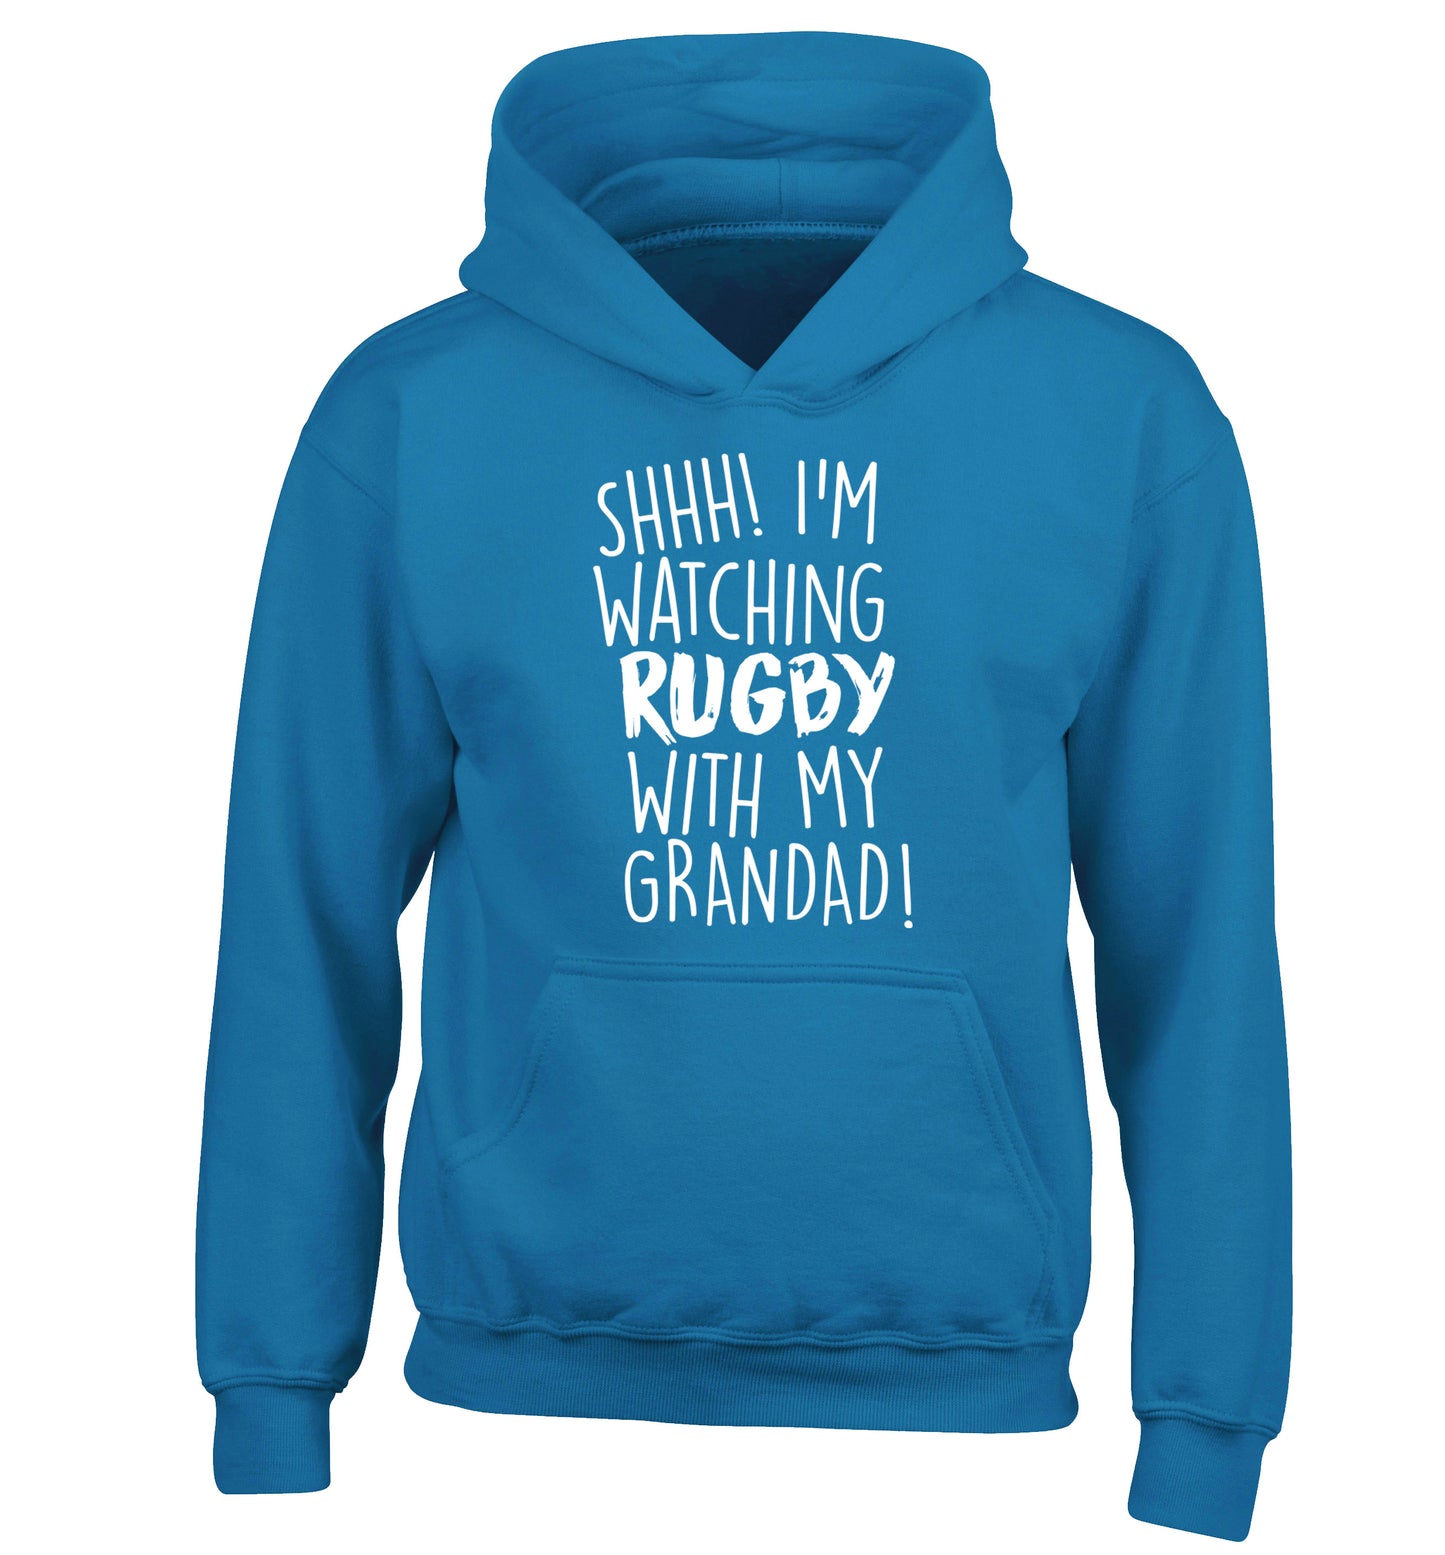 Shh I'm watching rugby with my grandaughter children's blue hoodie 12-13 Years